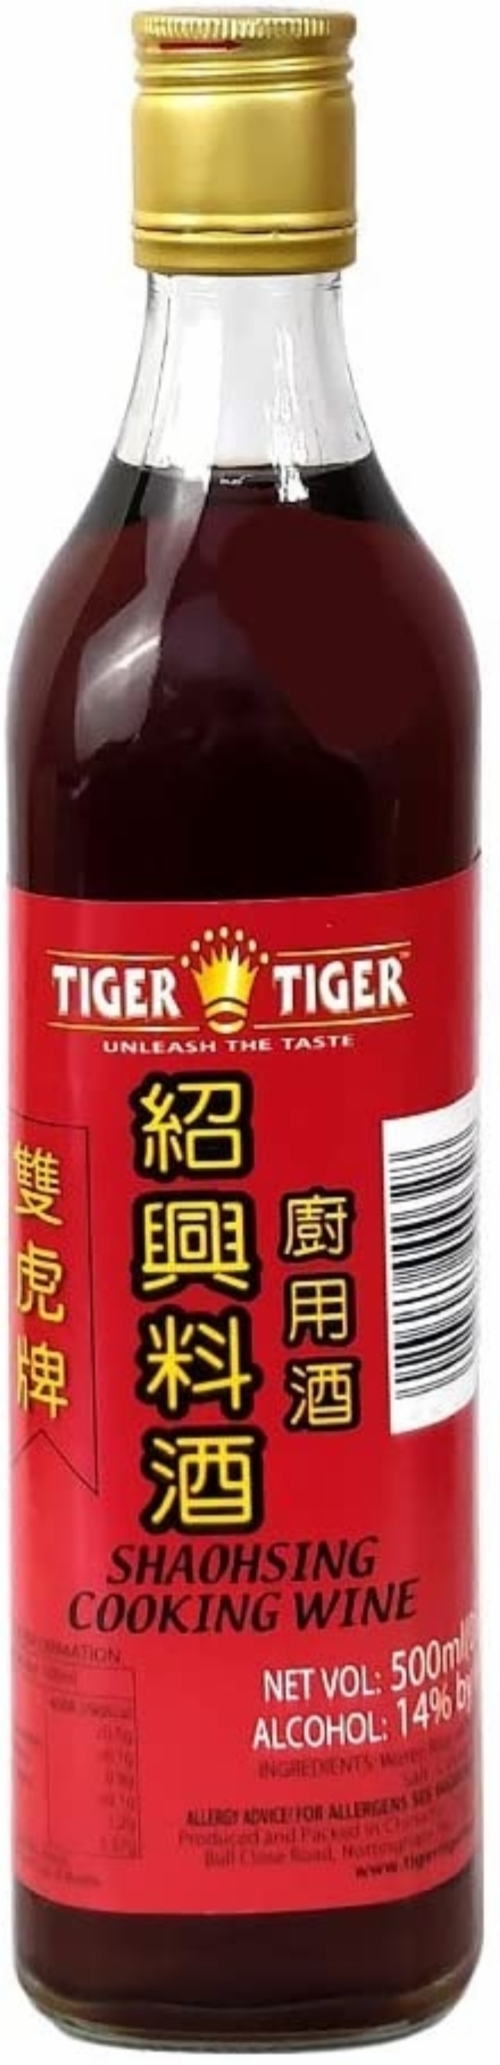 TIGER TIGER Shaohsing Cooking Wine 500ml 14% ABV